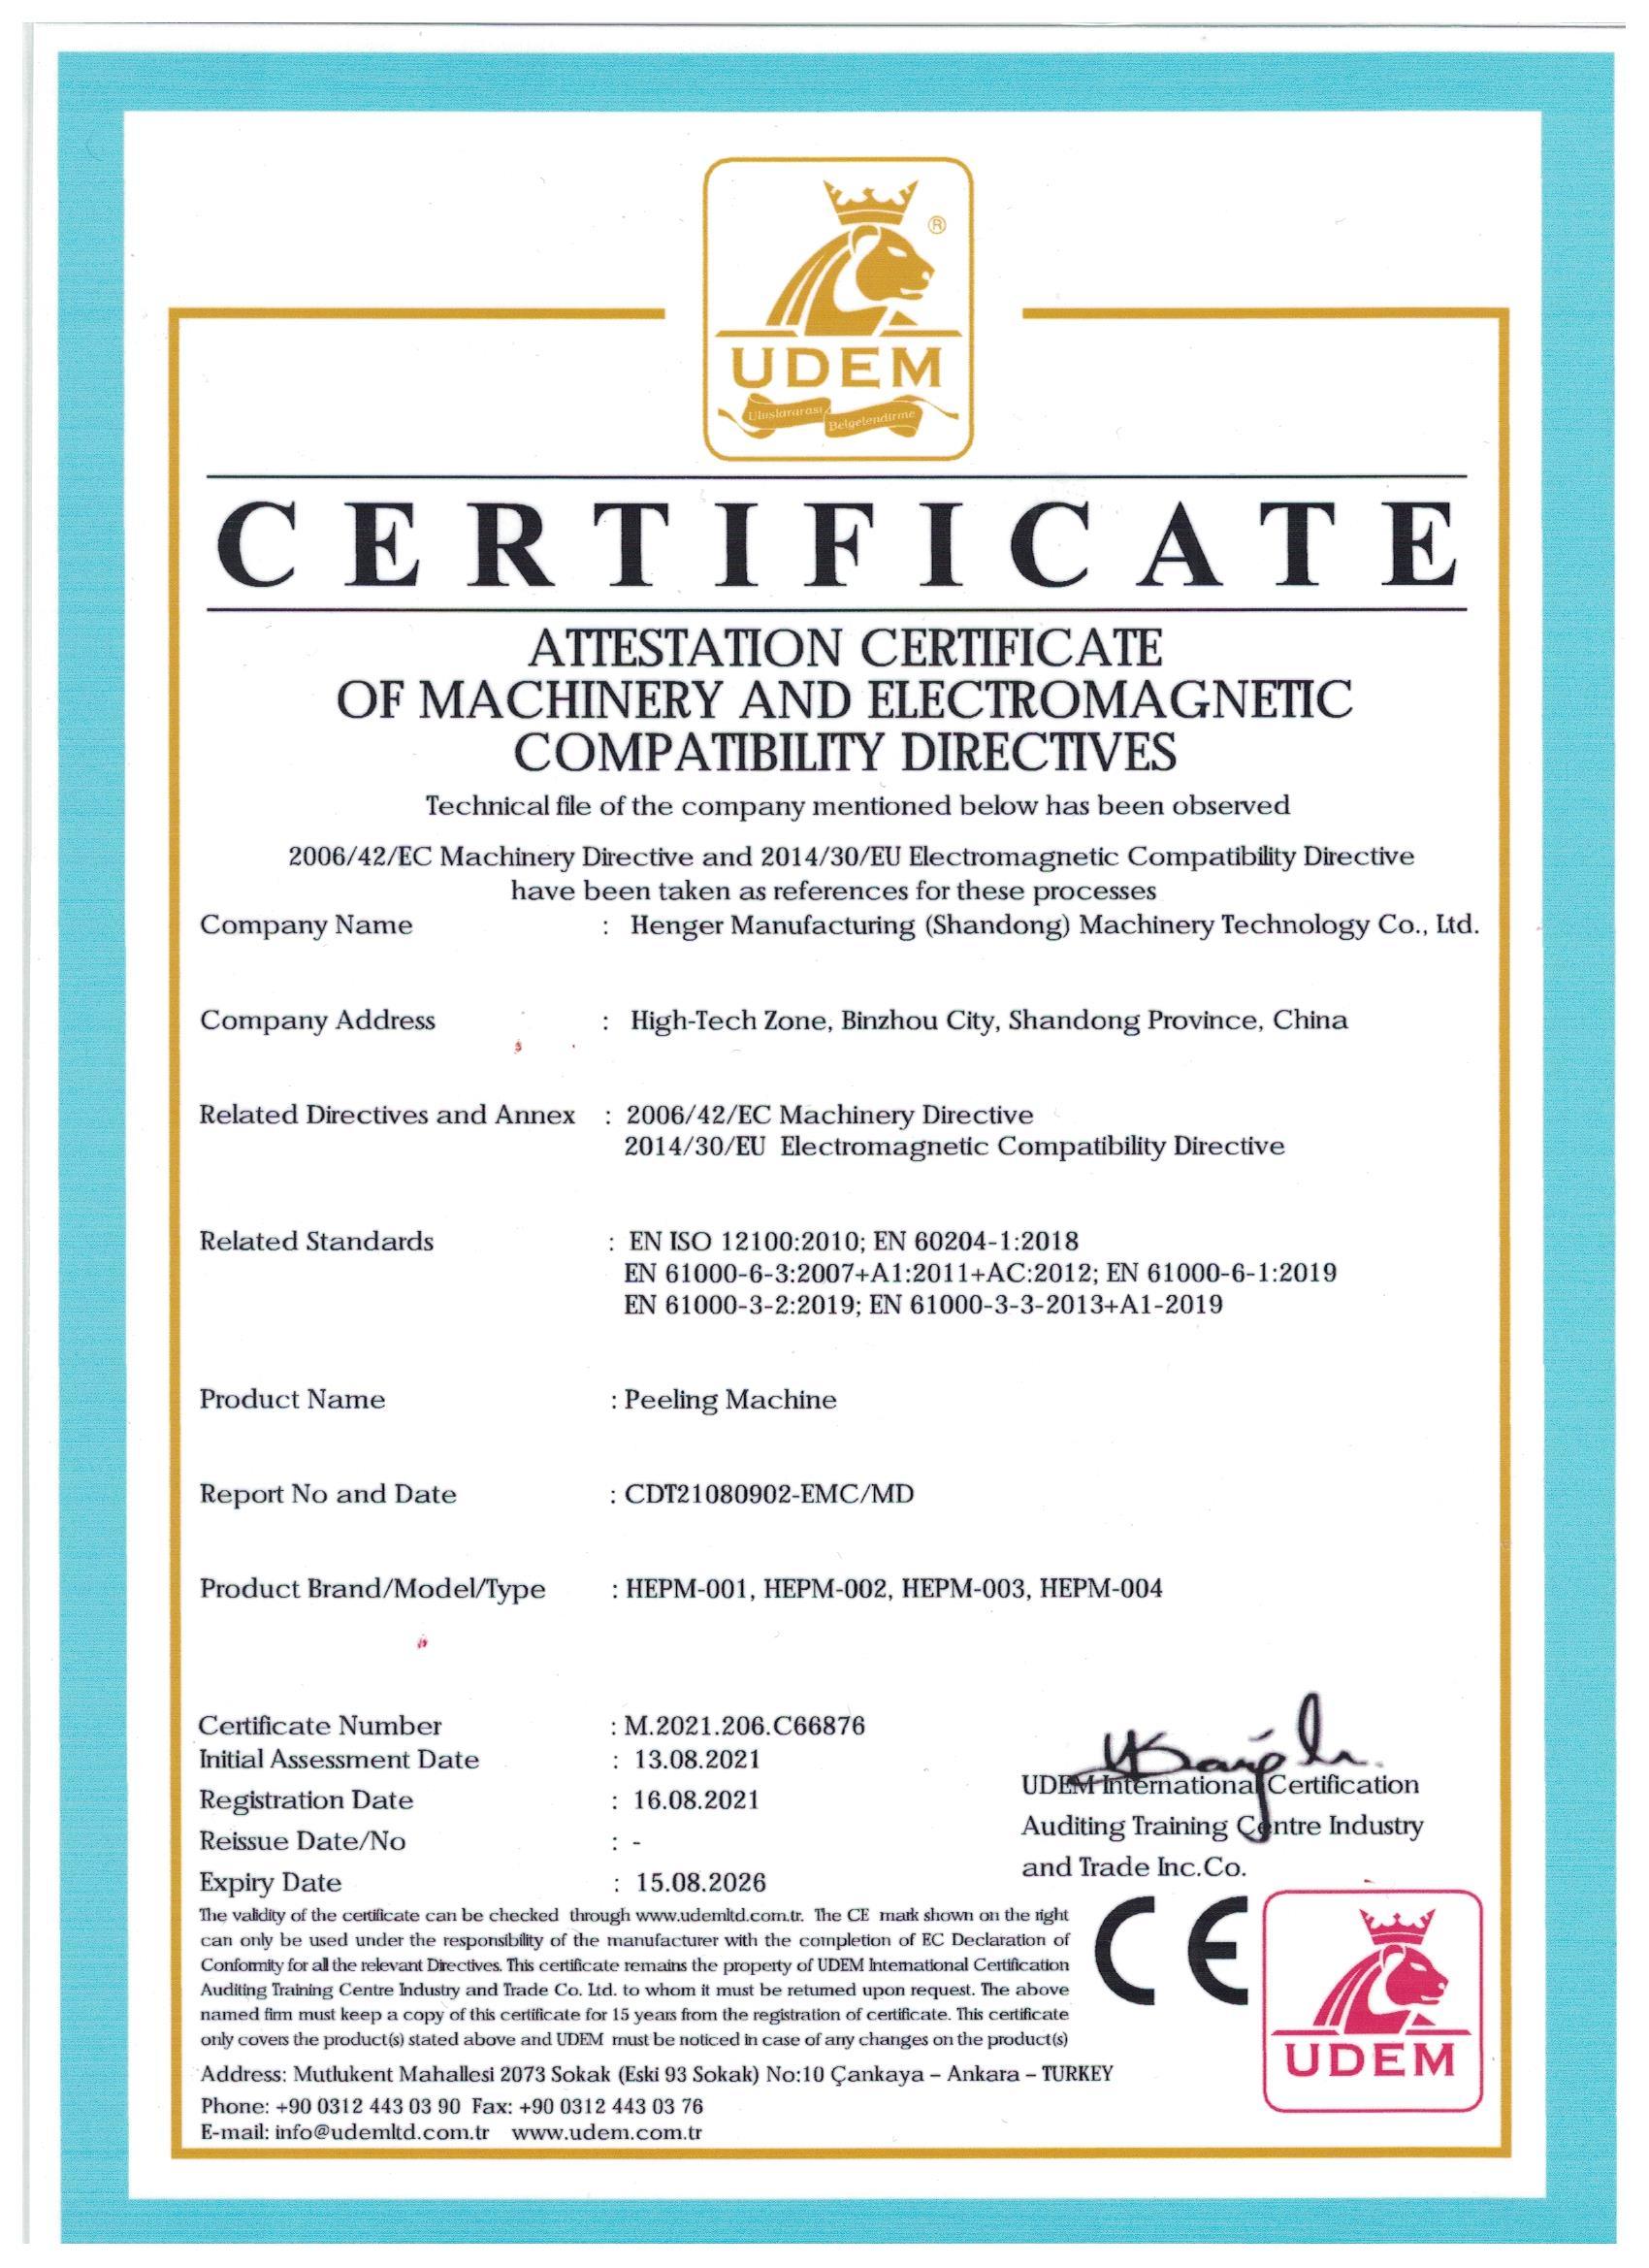 PRODUCT CERTIFICATE